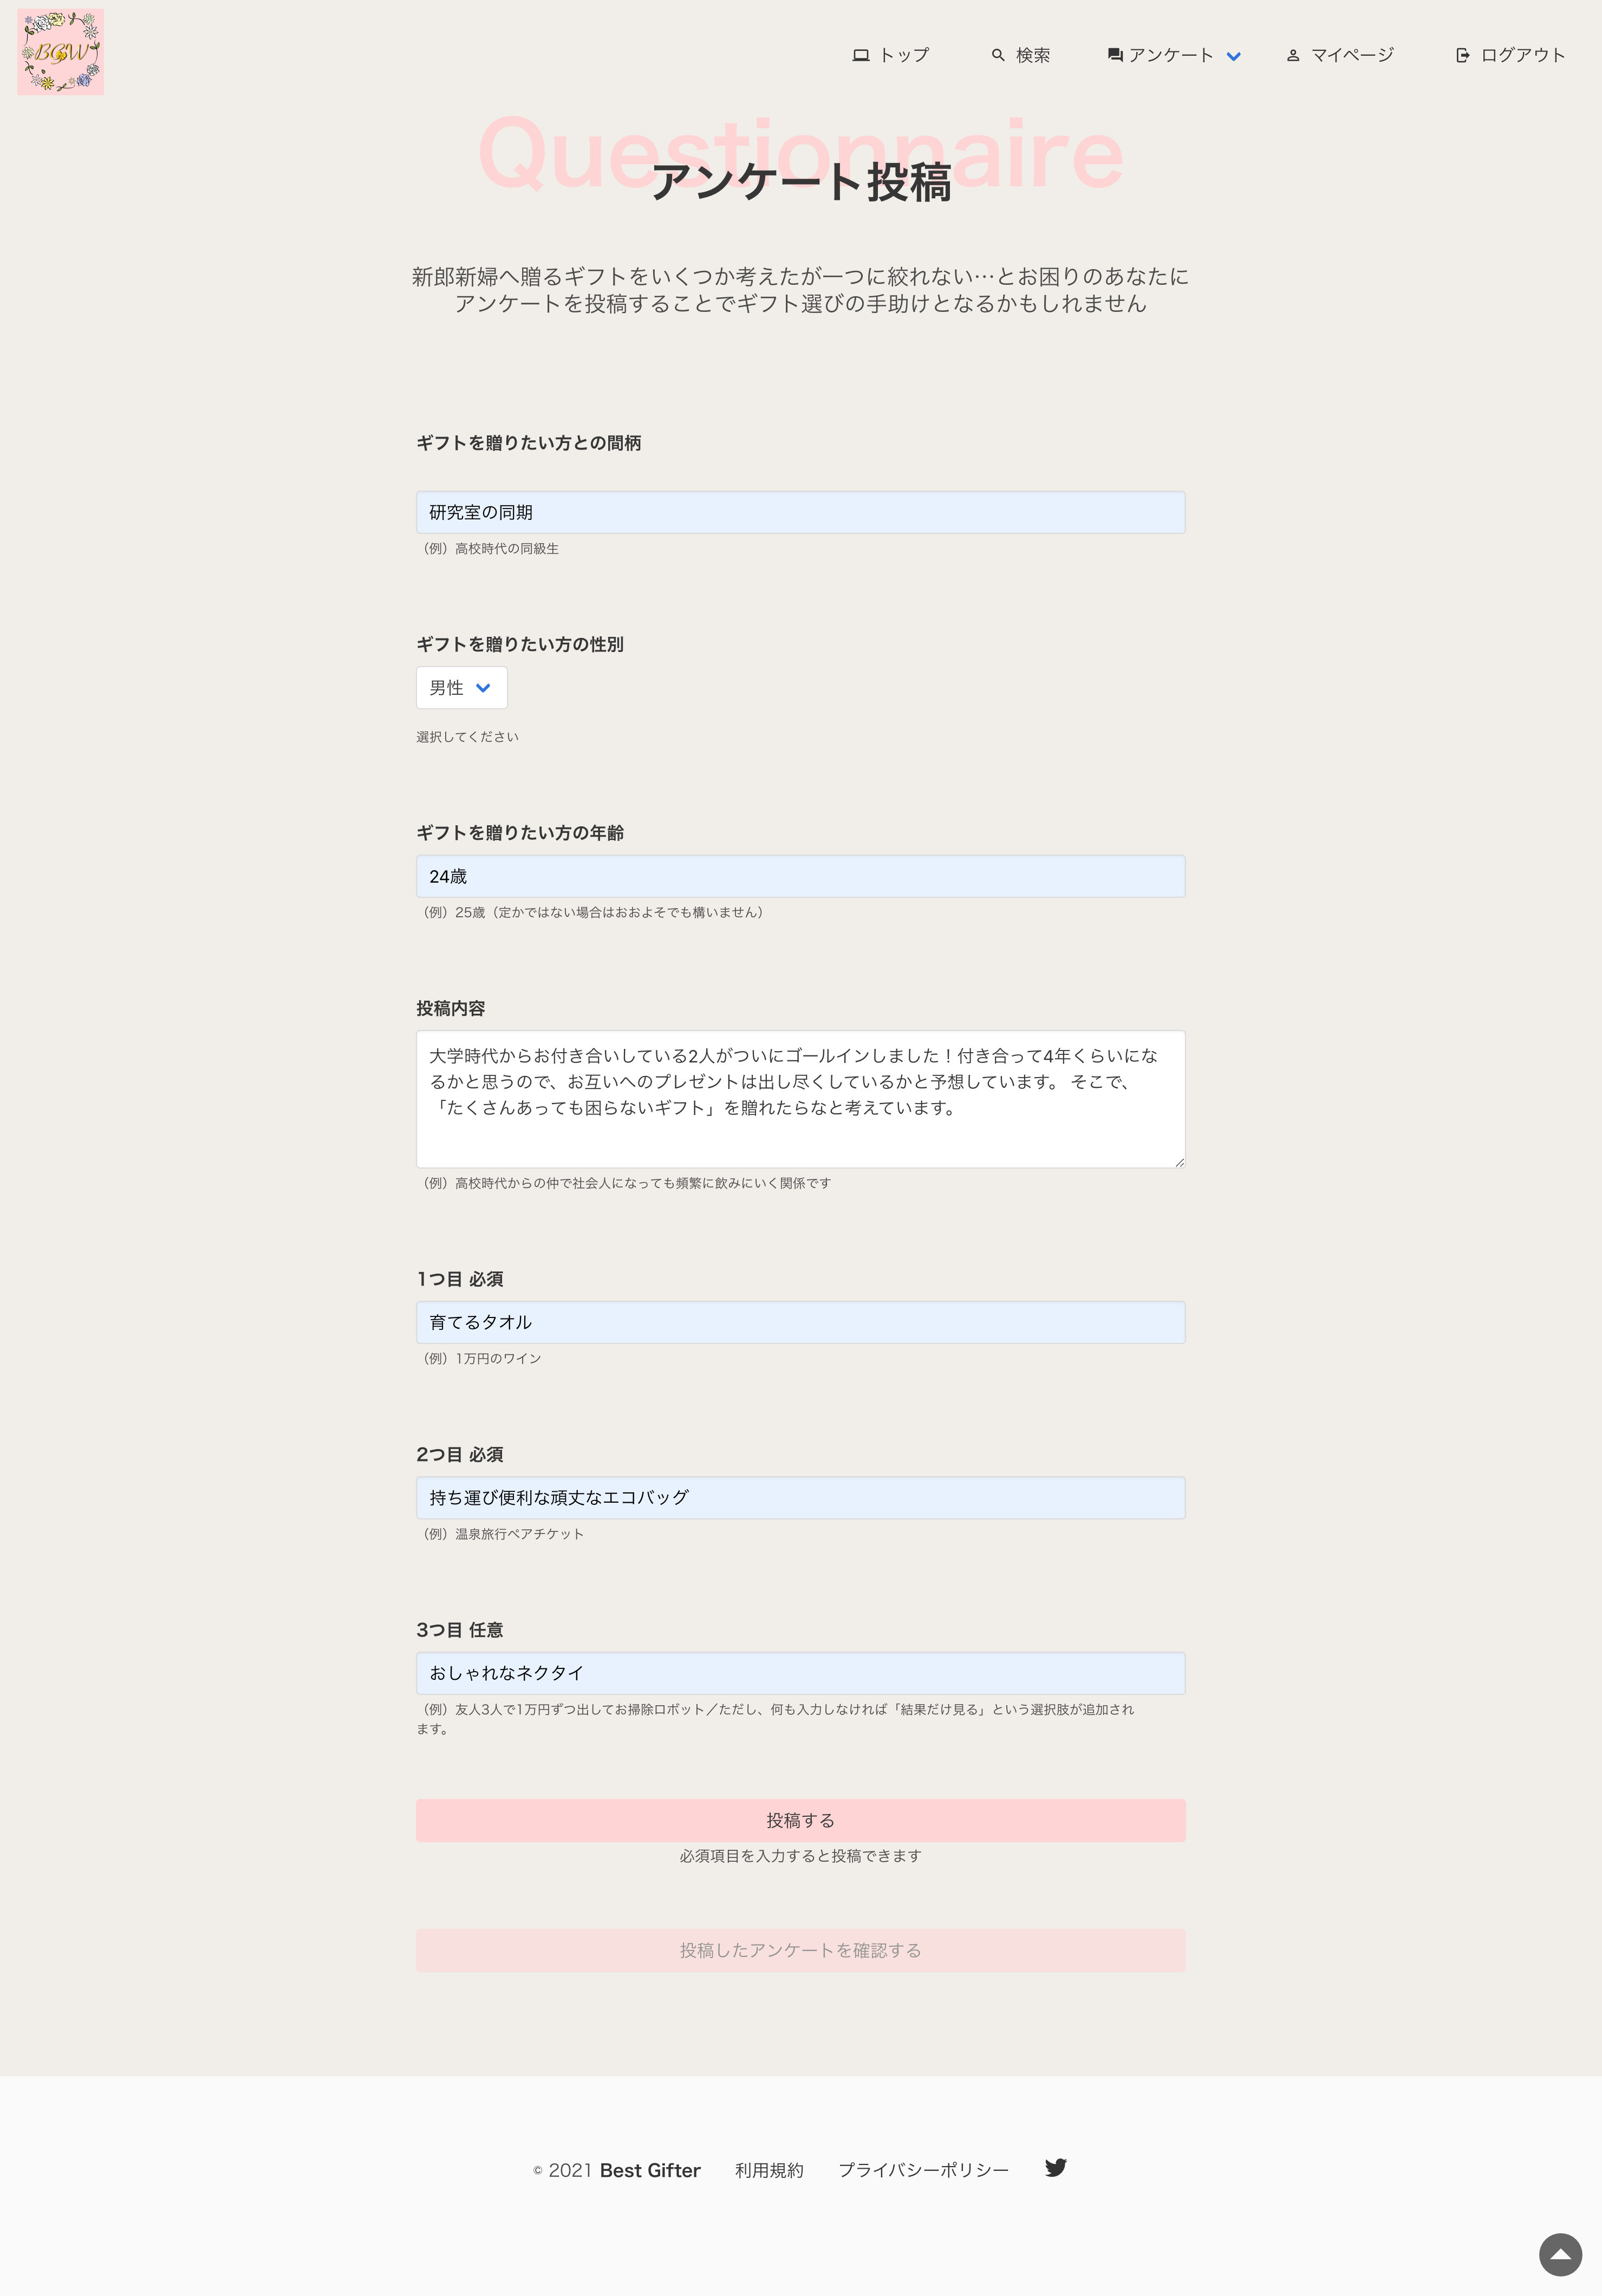 screencapture-best-gifter-work-questionnaire-form-2021-04-29-18_20_38.png